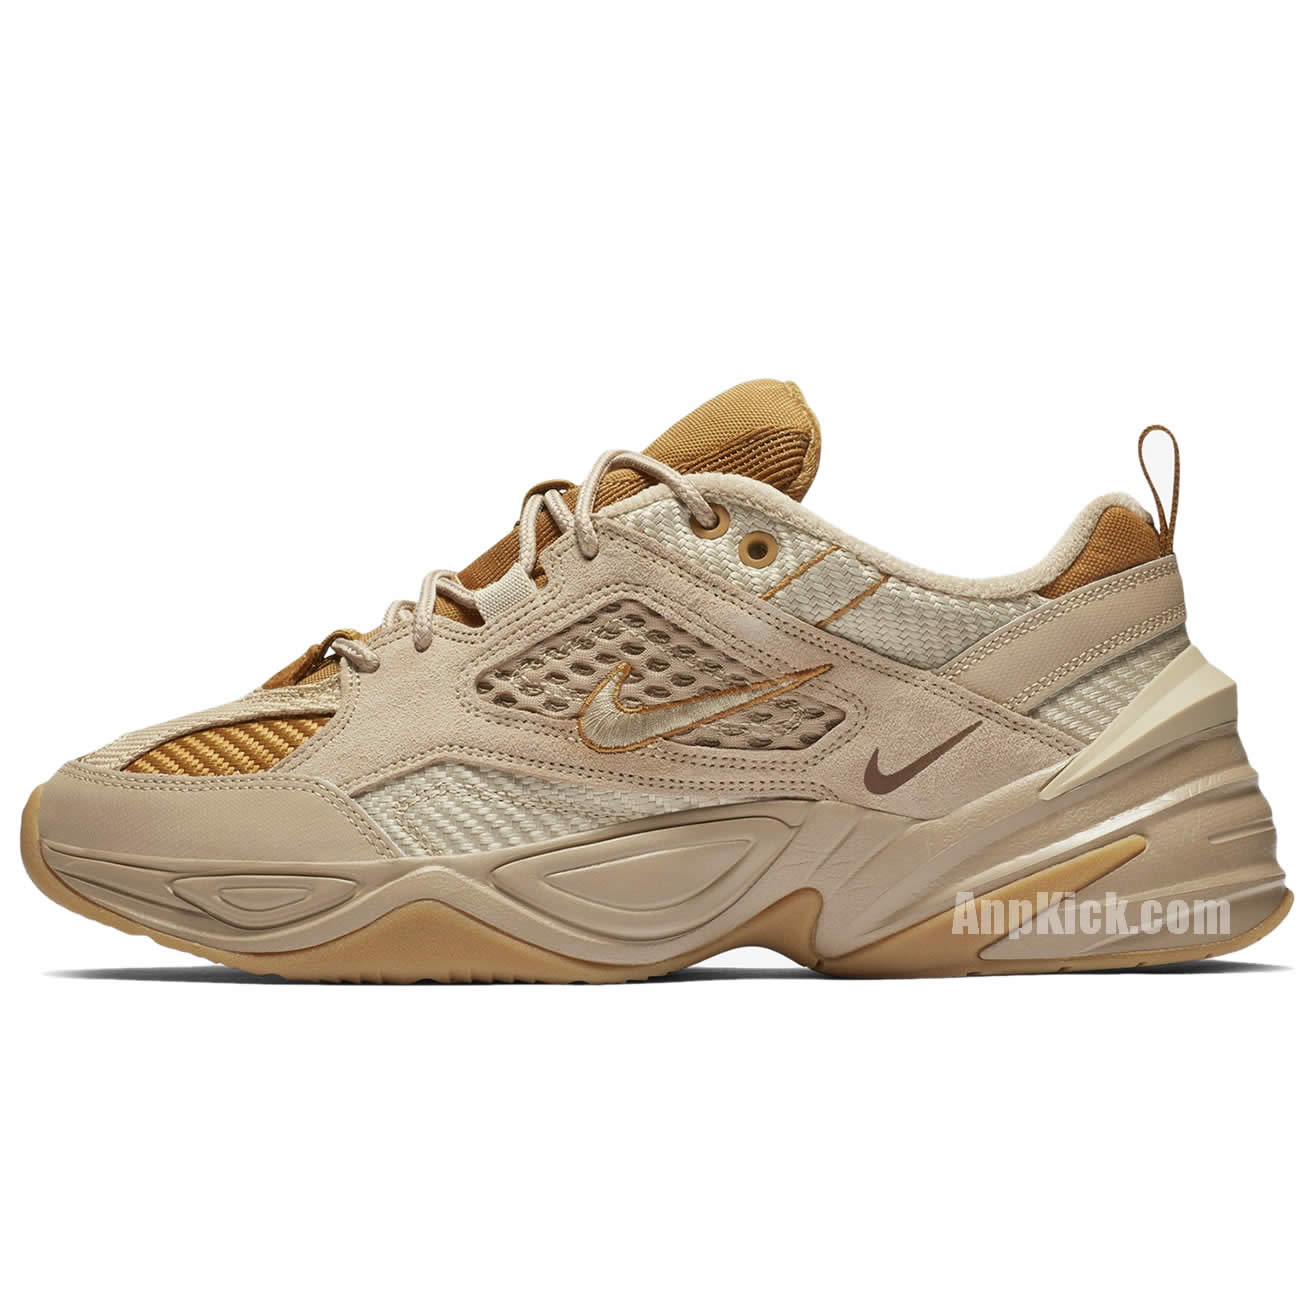 Nike M2k Techno Mens Womens Sp Linen Ale Brown Wheat Running Shoes Bv0074 200 (1) - newkick.org